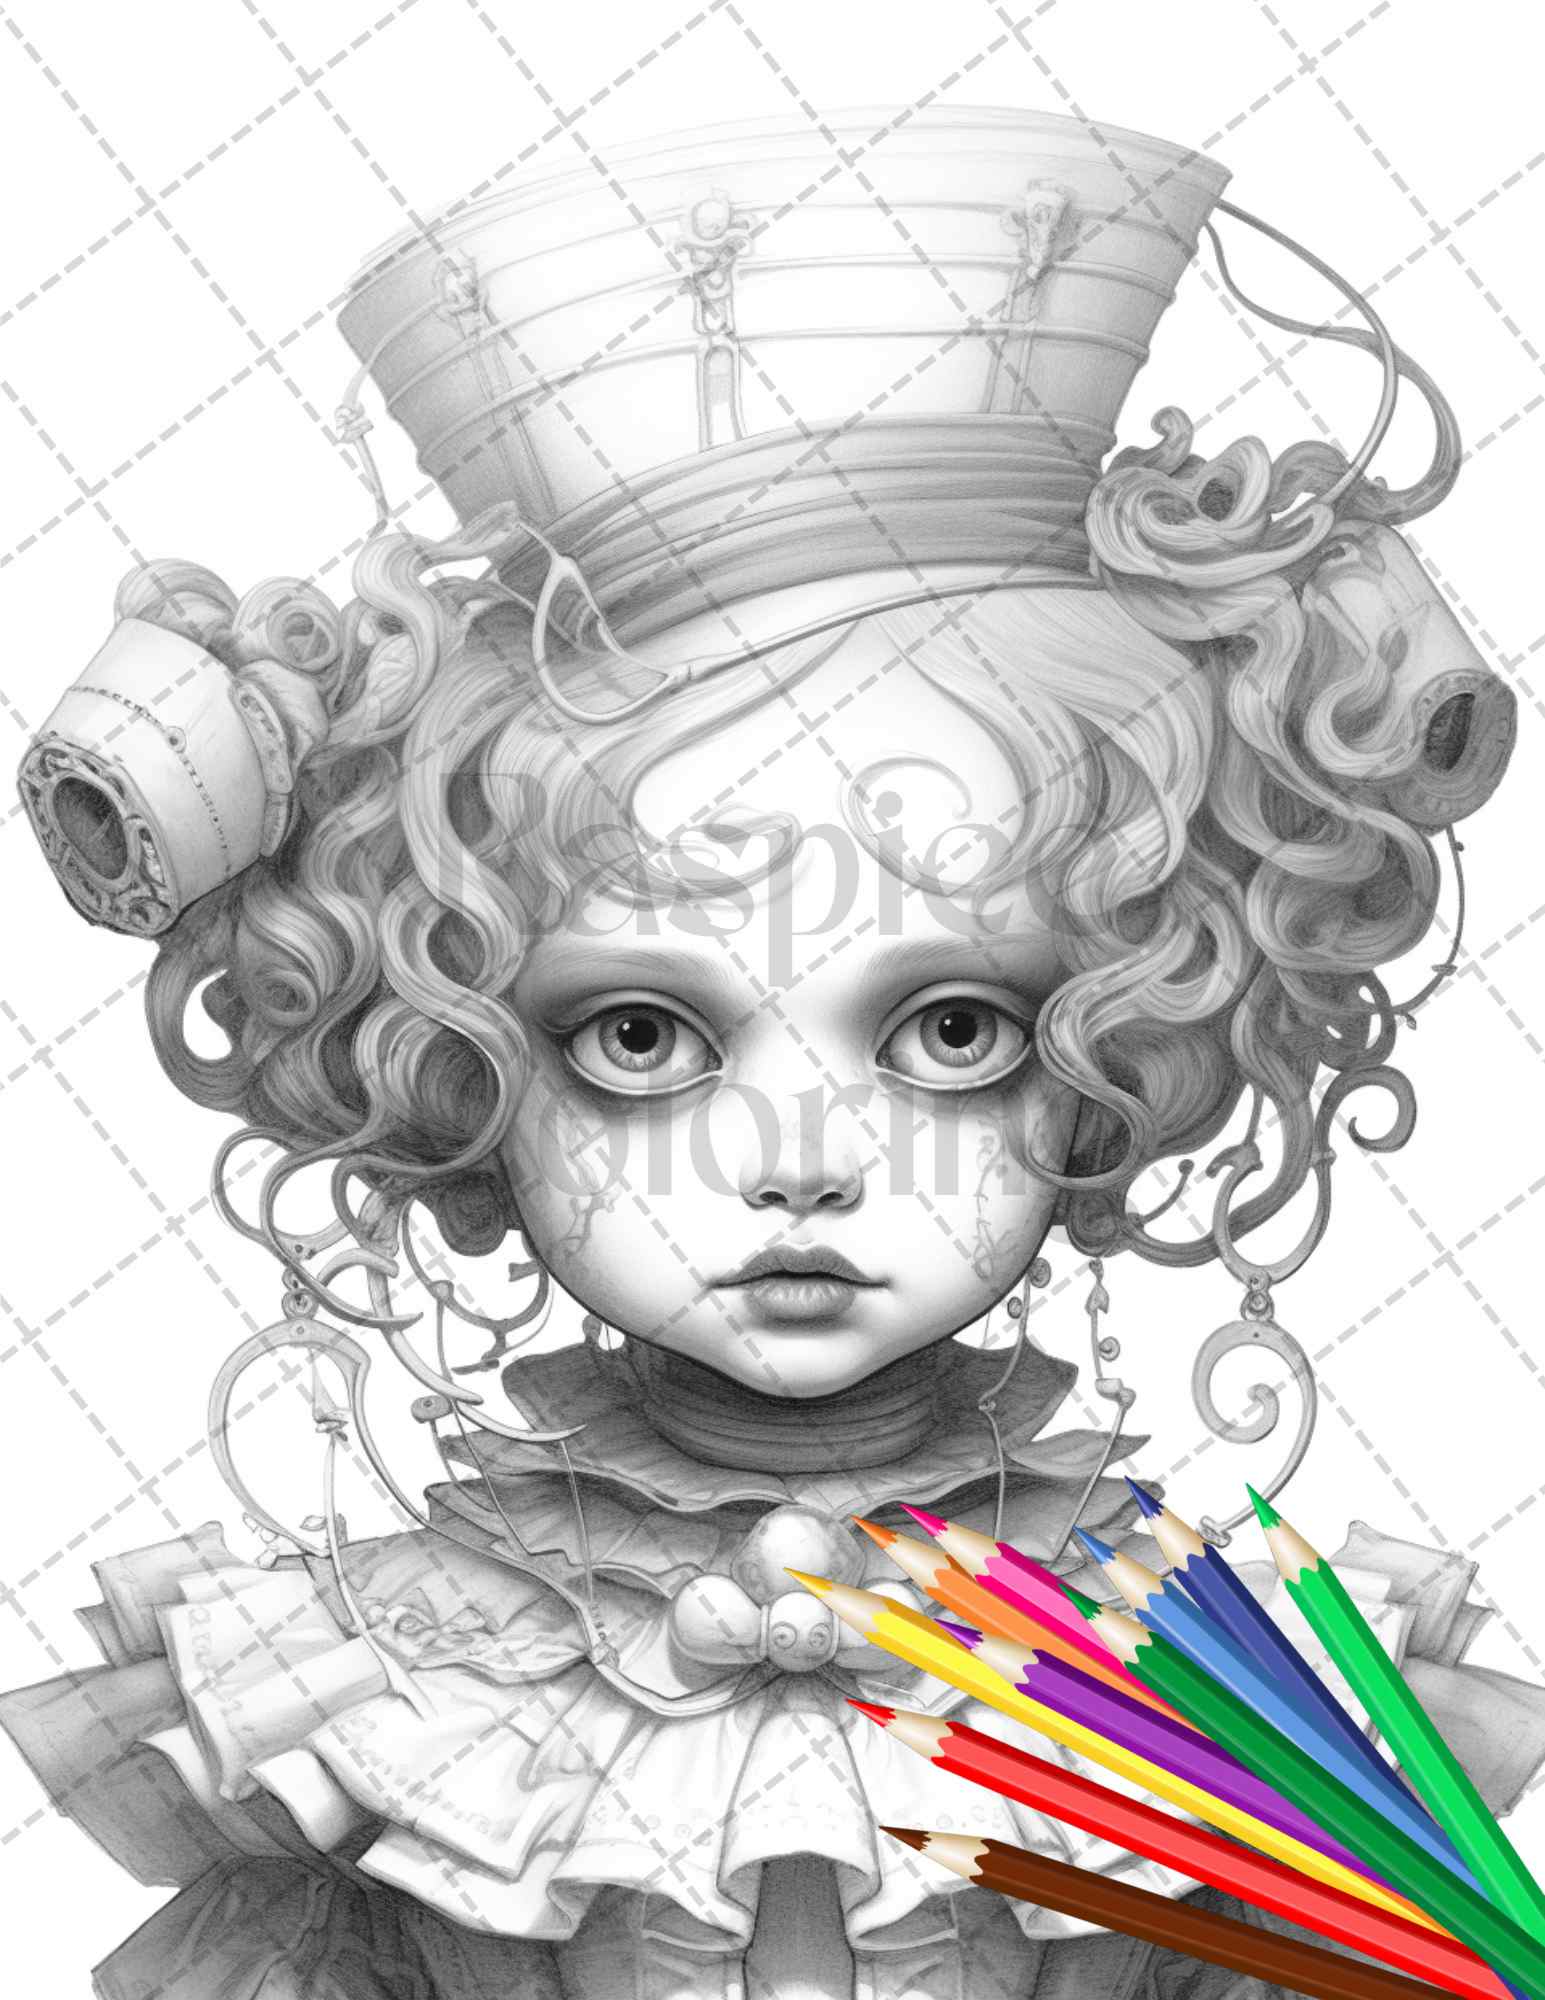 40 Creepy Porcelain Dolls Grayscale Coloring Pages for Adults, PDF File Instant Download - raspiee